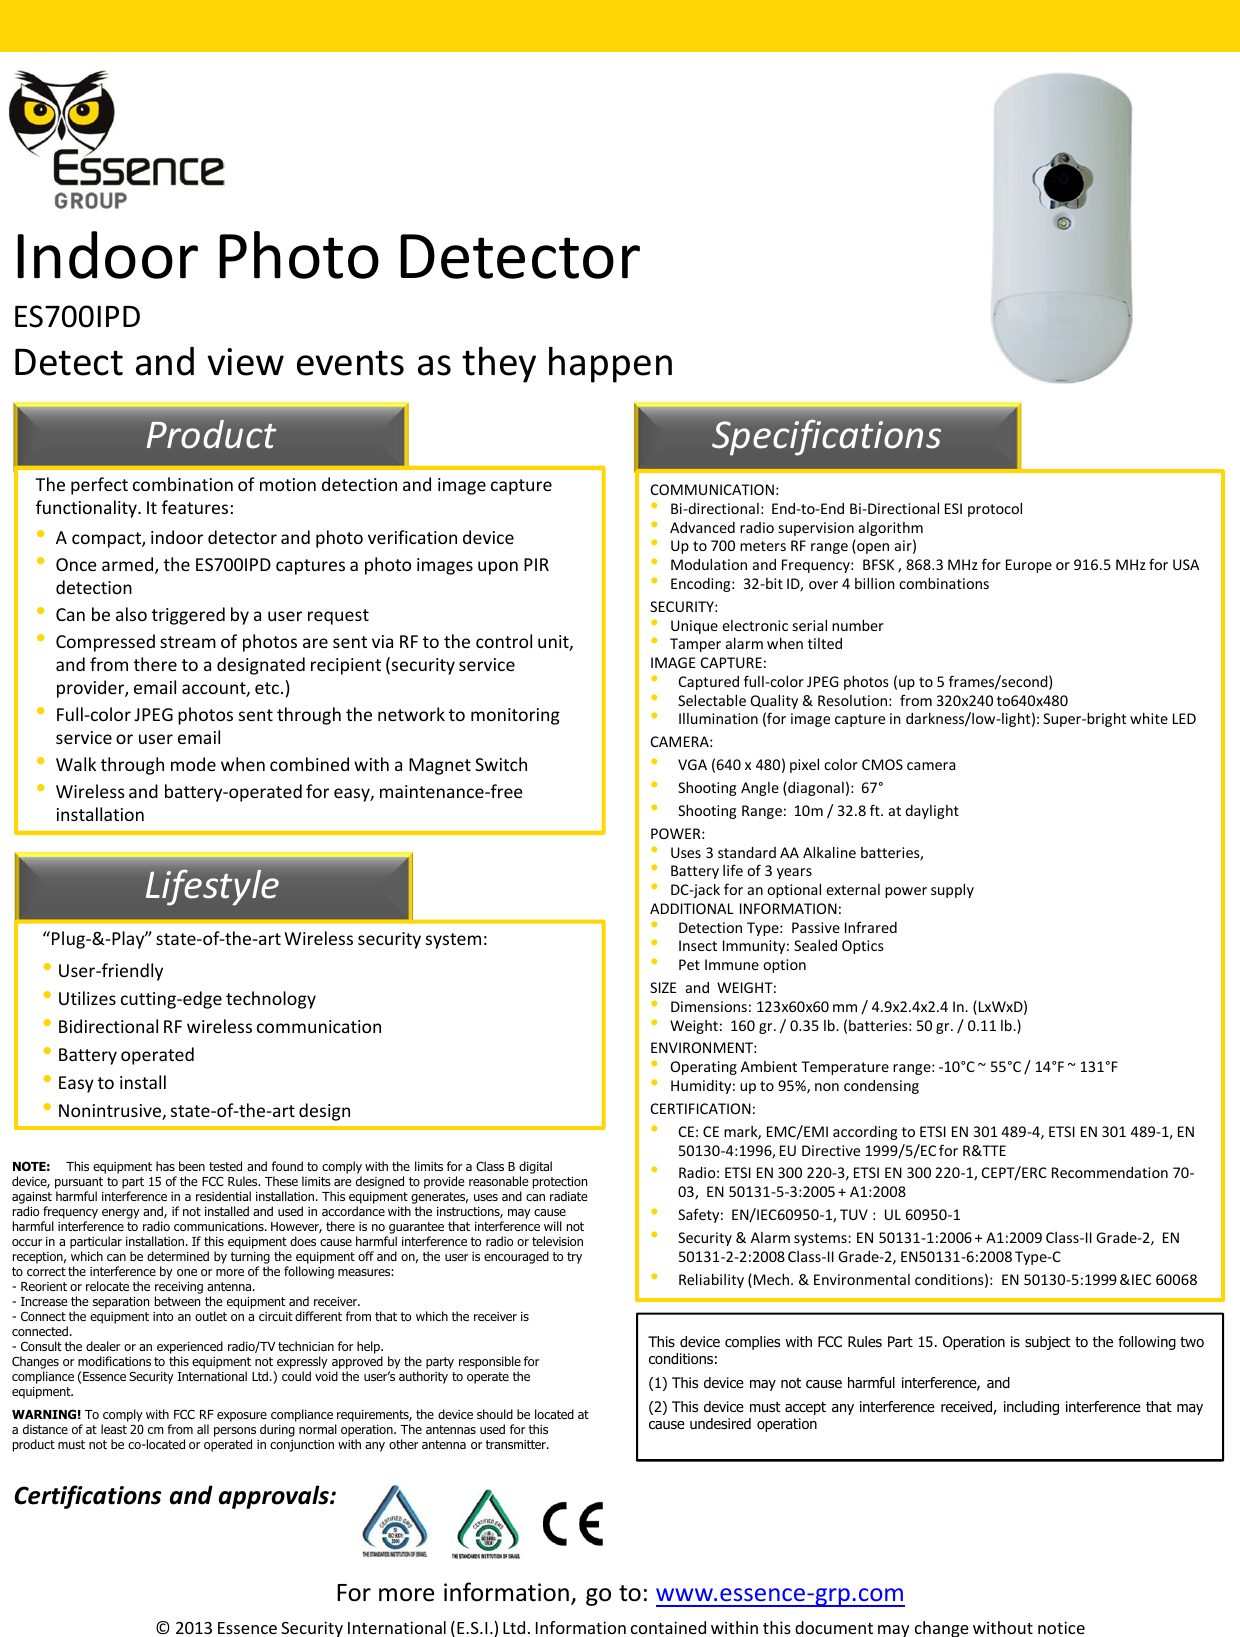 For more information, go to: www.essence-grp.com© 2013 Essence Security International (E.S.I.) Ltd. Information contained within this document may change without noticeIndoor Photo DetectorES700IPDDetect and view events as they happen11LifestyleProduct SpecificationsThe perfect combination of motion detection and image capture functionality. It features:•A compact, indoor detector and photo verification device•Once armed, the ES700IPD captures a photo images upon PIR detection•Can be also triggered by a user request•Compressed stream of photos are sent via RF to the control unit, and from there to a designated recipient (security service provider, email account, etc.)•Full-color JPEG photos sent through the network to monitoring service or user email•Walk through mode when combined with a Magnet Switch•Wireless and battery-operated for easy, maintenance-free installation“Plug-&amp;-Play” state-of-the-art Wireless security system:•User-friendly•Utilizes cutting-edge technology•Bidirectional RF wireless communication•Battery operated•Easy to install•Nonintrusive, state-of-the-art designCOMMUNICATION:•Bi-directional:  End-to-End Bi-Directional ESI protocol•Advanced radio supervision algorithm•Up to 700 meters RF range (open air)•Modulation and Frequency:  BFSK , 868.3 MHz for Europe or 916.5 MHz for USA•Encoding:  32-bit ID, over 4 billion combinationsSECURITY:•Unique electronic serial number•Tamper alarm when tiltedIMAGE CAPTURE:•Captured full-color JPEG photos (up to 5 frames/second)•Selectable Quality &amp; Resolution:  from 320x240 to640x480•Illumination (for image capture in darkness/low-light): Super-bright white LEDCAMERA:•VGA (640 x 480) pixel color CMOS camera•Shooting Angle (diagonal):  67°•Shooting Range:  10m / 32.8 ft. at daylightPOWER:•Uses 3 standard AA Alkaline batteries,•Battery life of 3 years•DC-jack for an optional external power supplyADDITIONAL INFORMATION:•Detection Type:  Passive Infrared •Insect Immunity: Sealed Optics•Pet Immune optionSIZE  and  WEIGHT: •Dimensions: 123x60x60 mm / 4.9x2.4x2.4 In. (LxWxD) •Weight:  160 gr. / 0.35 lb. (batteries: 50 gr. / 0.11 lb.) ENVIRONMENT:•Operating Ambient Temperature range: -10°C ~ 55°C / 14°F ~ 131°F •Humidity: up to 95%, non condensing CERTIFICATION:•CE: CE mark, EMC/EMI according to ETSI EN 301 489-4, ETSI EN 301 489-1, EN 50130-4:1996, EU Directive 1999/5/EC for R&amp;TTE •Radio: ETSI EN 300 220-3, ETSI EN 300 220-1, CEPT/ERC Recommendation 70-03,  EN 50131-5-3:2005 + A1:2008 •Safety:  EN/IEC60950-1, TUV :  UL 60950-1•Security &amp; Alarm systems: EN 50131-1:2006 + A1:2009 Class-II Grade-2,  EN 50131-2-2:2008 Class-II Grade-2, EN50131-6:2008 Type-C•Reliability (Mech. &amp; Environmental conditions):  EN 50130-5:1999 &amp;IEC 60068Certifications and approvals:NOTE: This equipment has been tested and found to comply with the limits for a Class B digital device, pursuant to part 15 of the FCC Rules. These limits are designed to provide reasonable protection against harmful interference in a residential installation. This equipment generates, uses and can radiate radio frequency energy and, if not installed and used in accordance with the instructions, may cause harmful interference to radio communications. However, there is no guarantee that interference will not occur in a particular installation. If this equipment does cause harmful interference to radio or television reception, which can be determined by turning the equipment off and on, the user is encouraged to try to correct the interference by one or more of the following measures: - Reorient or relocate the receiving antenna.- Increase the separation between the equipment and receiver.- Connect the equipment into an outlet on a circuit different from that to which the receiver is connected.- Consult the dealer or an experienced radio/TV technician for help.Changes or modifications to this equipment not expressly approved by the party responsible for compliance (Essence Security International Ltd.) could void the user’s authority to operate the equipment.WARNING! To comply with FCC RF exposure compliance requirements, the device should be located at a distance of at least 20 cm from all persons during normal operation. The antennas used for this product must not be co-located or operated in conjunction with any other antenna or transmitter.This device complies with FCC Rules Part 15. Operation is subject to the following twoconditions:(1) This device may not cause harmful interference, and(2) This device must accept any interference received, including interference that maycause undesired operation